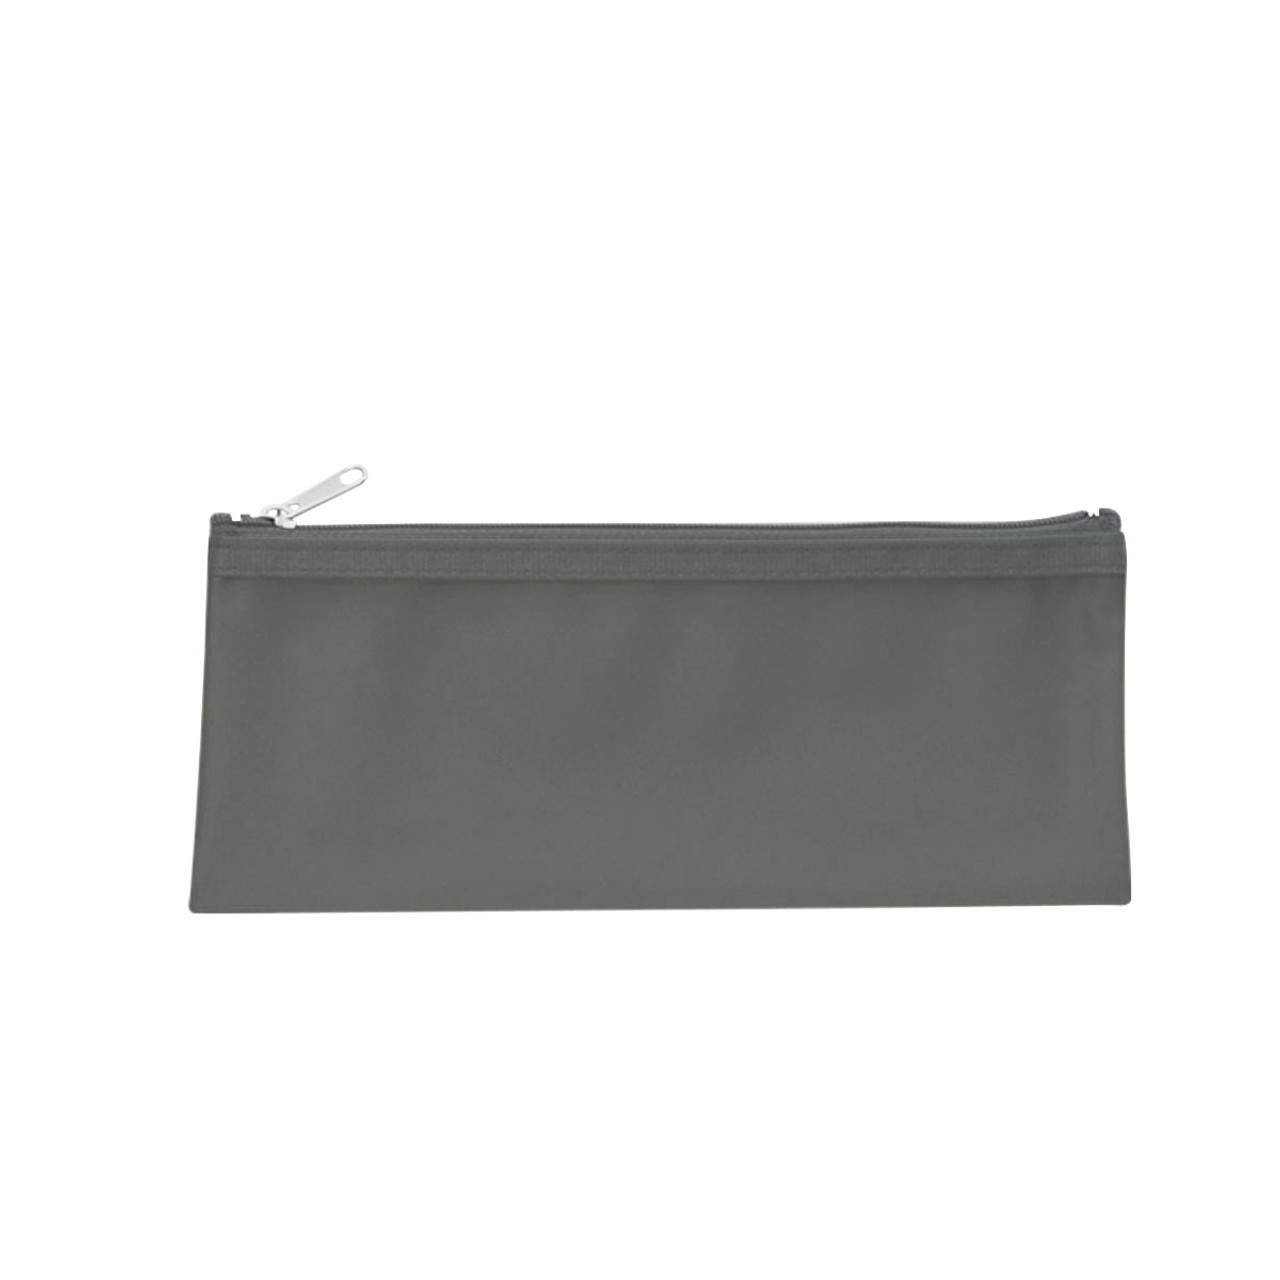 Clear Zippered Pencil Pouch